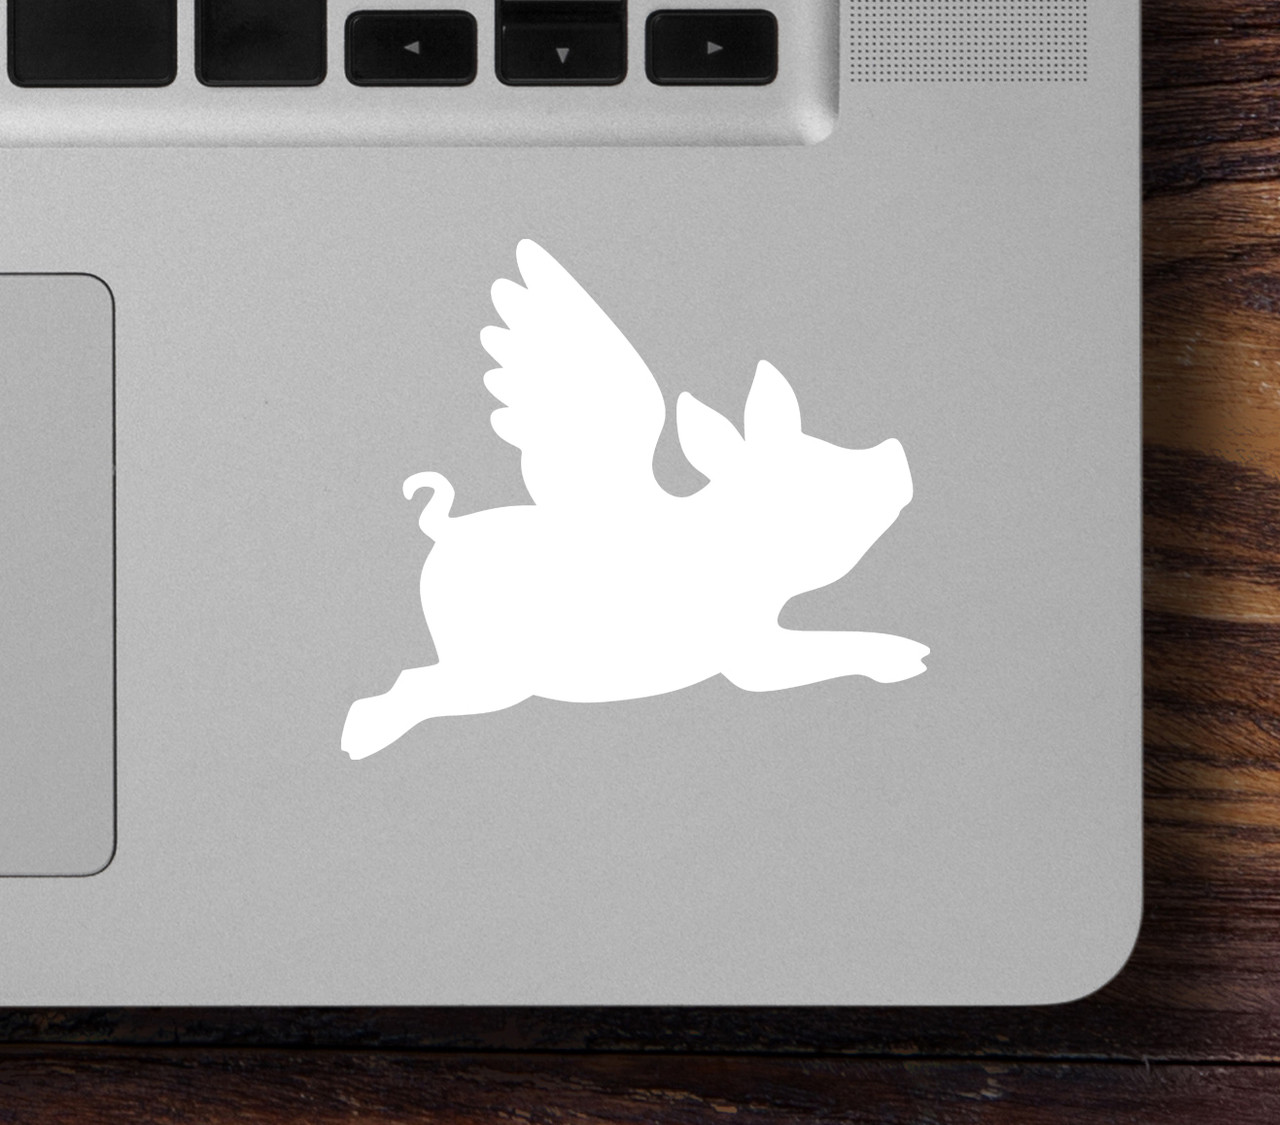 2x FLYING PIG 2.5" x 2.25" Vinyl Decal Stickers - Wings - When Pigs Fly